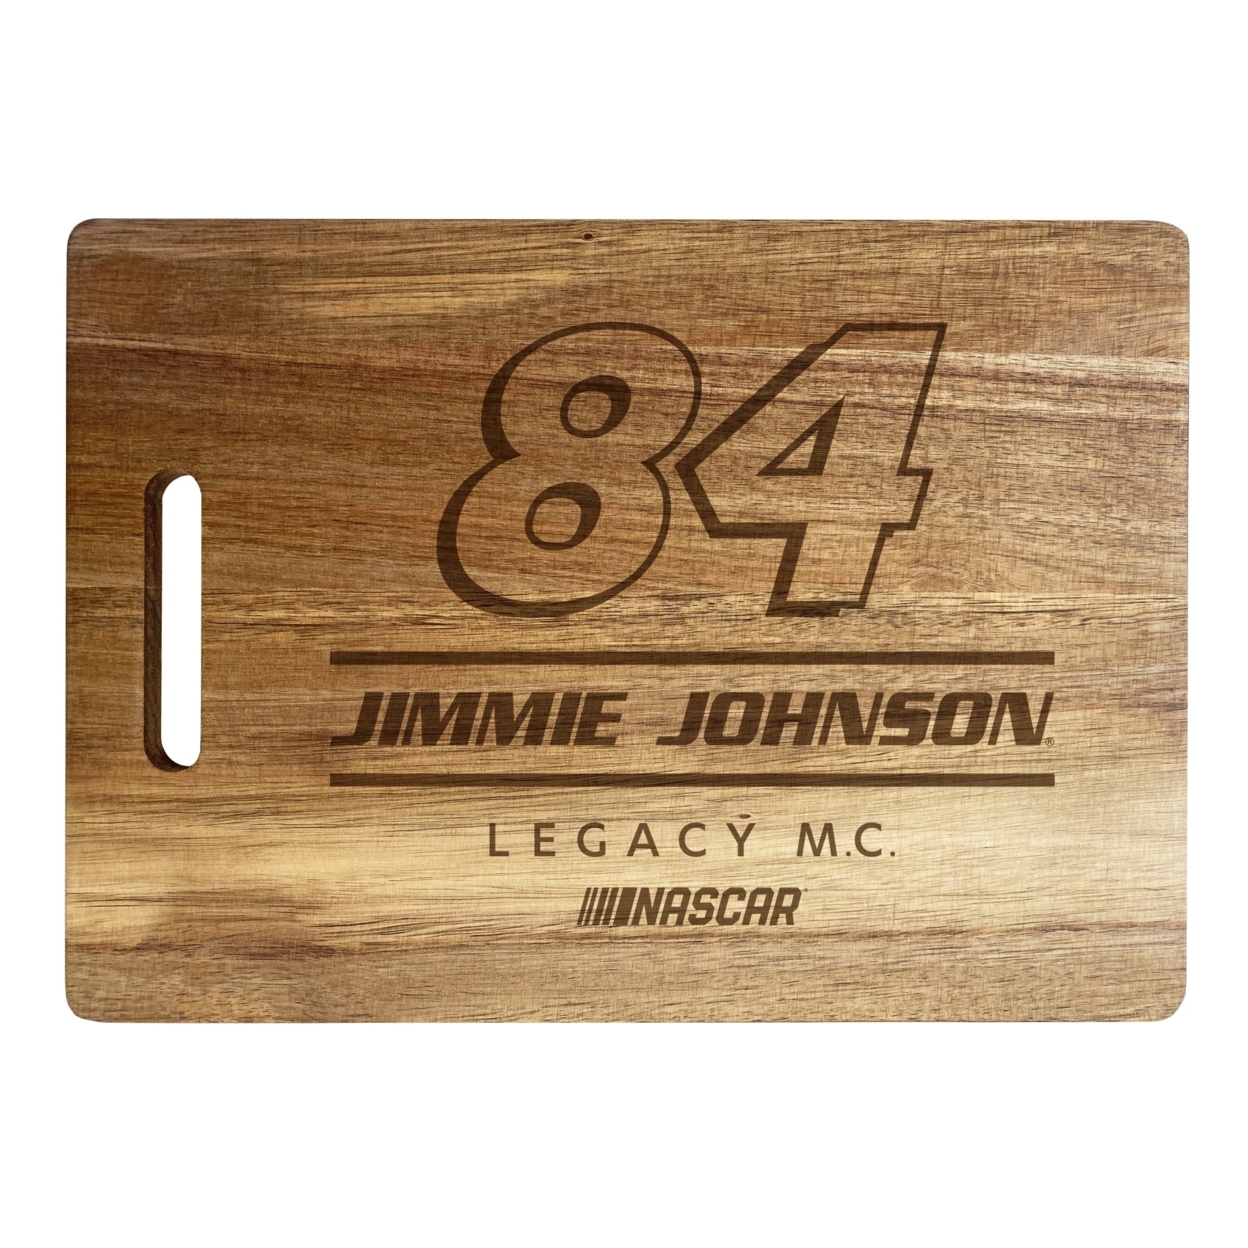 #84 Jimmie Johnson NASCAR Officially Licensed Engraved Wooden Cutting Board